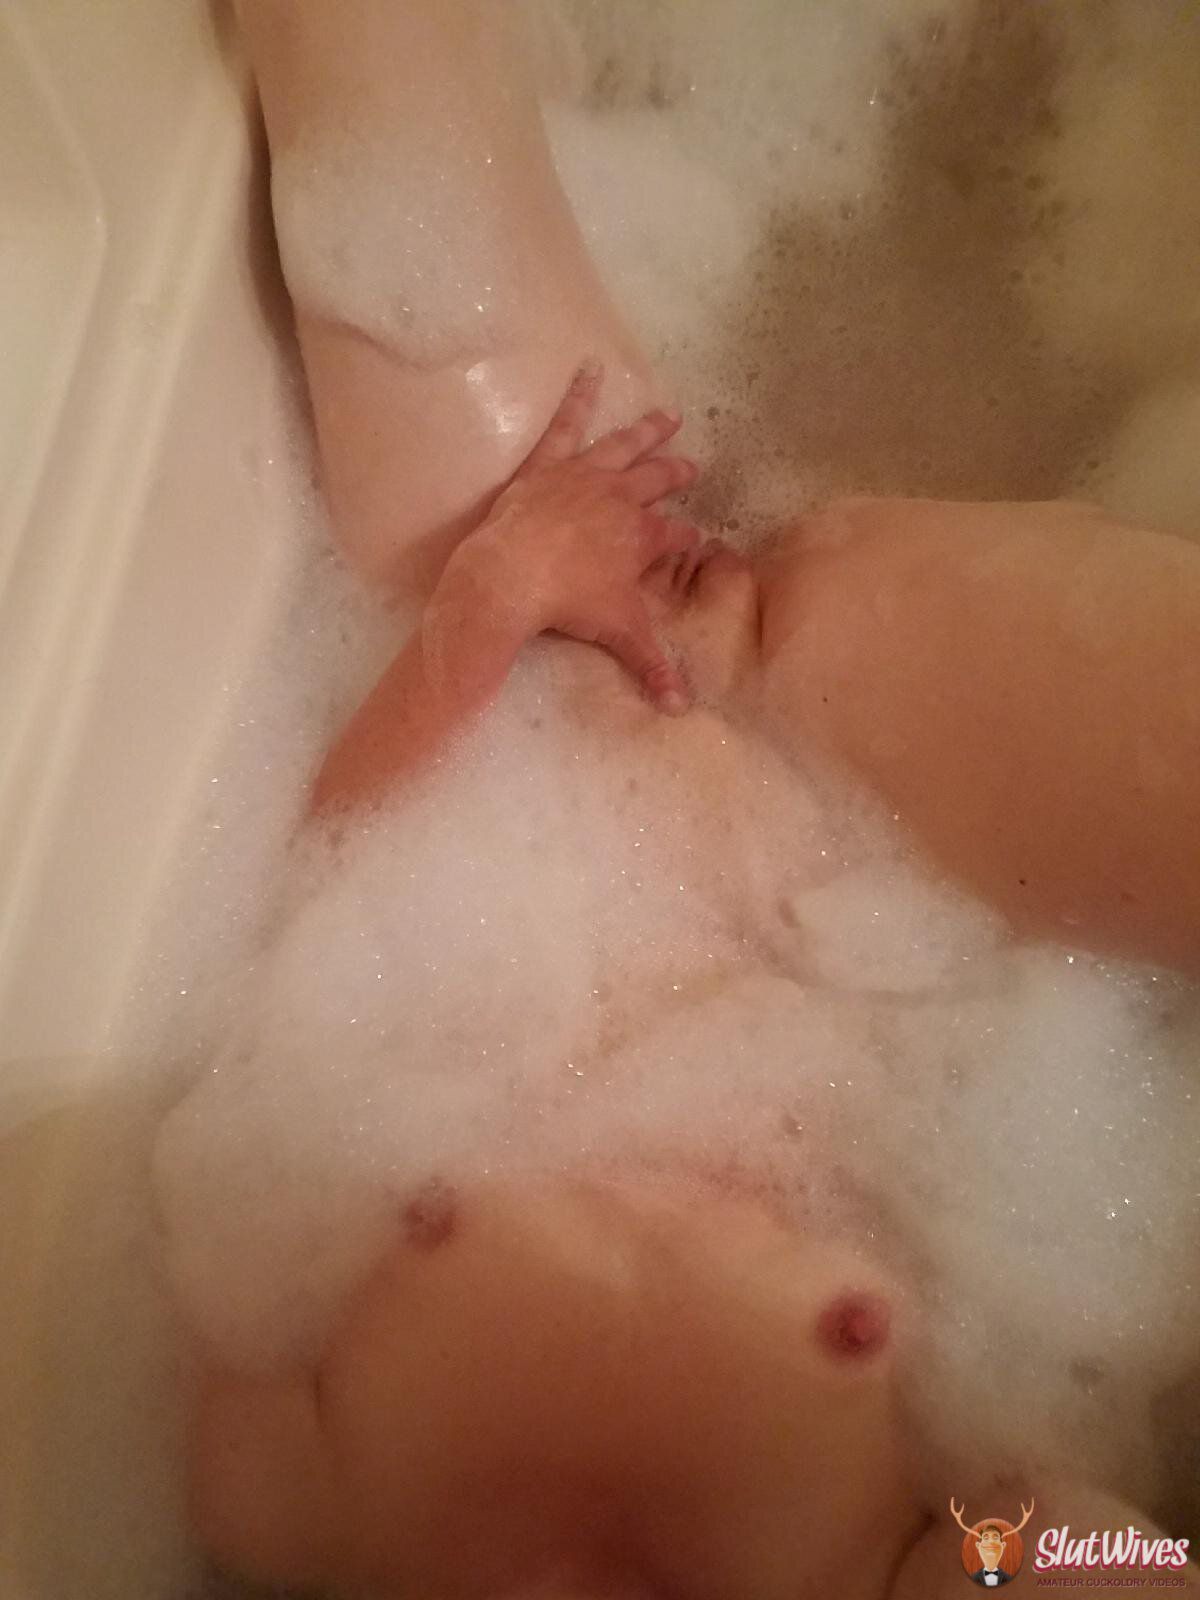 I love playing in the tub